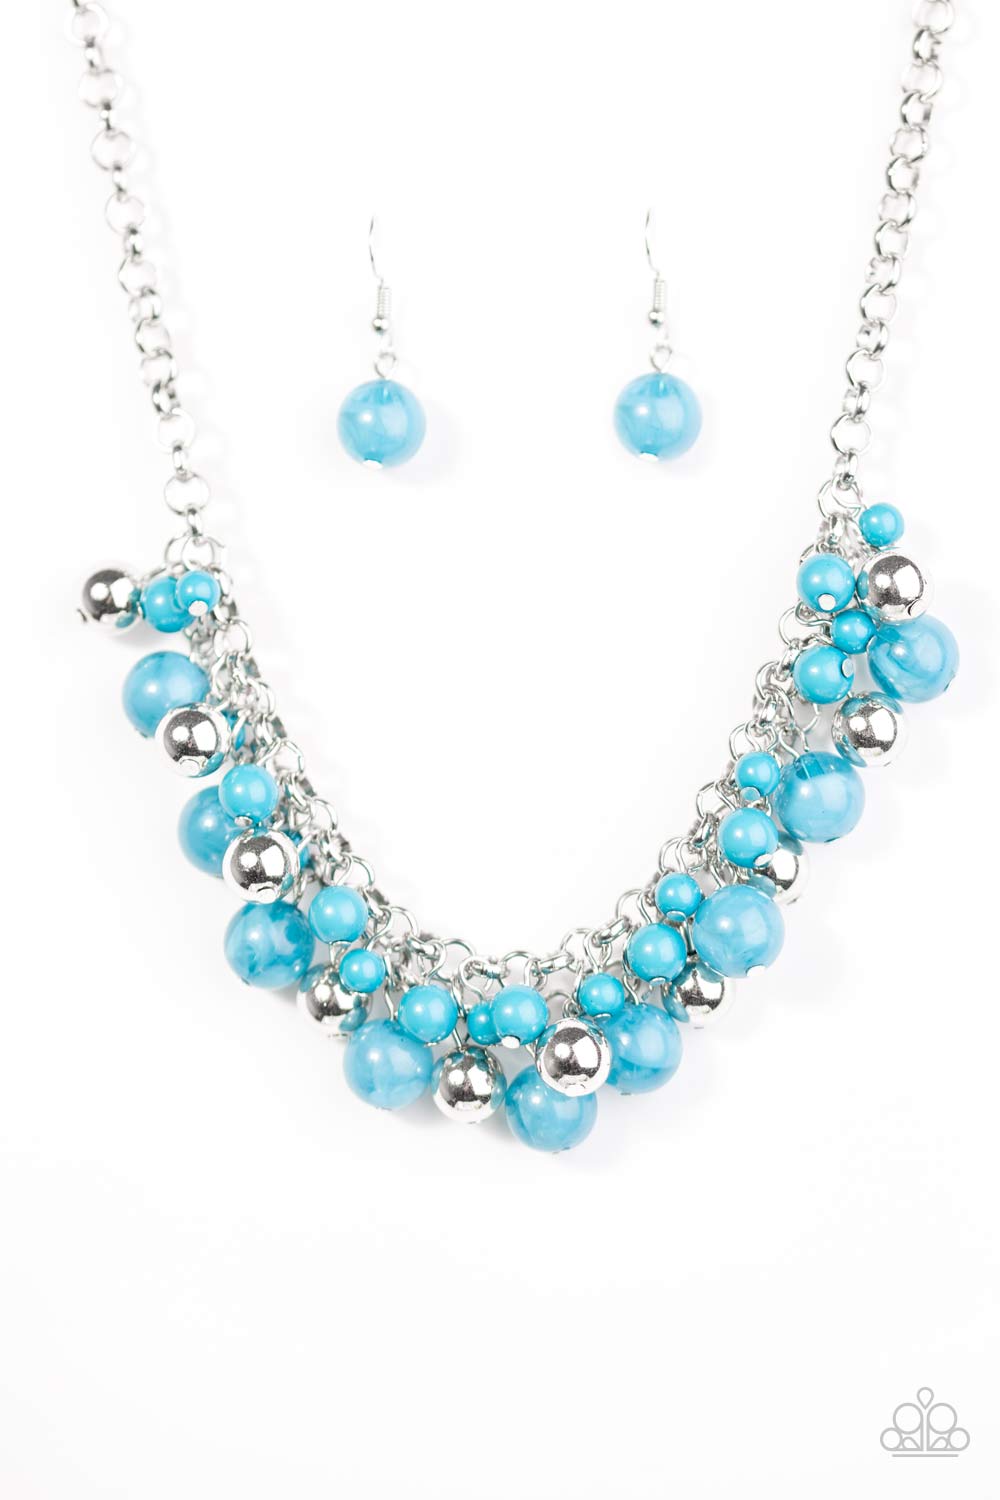 Paparazzi Accessories - For The Love Of Fashion - #N135 Blue Necklace